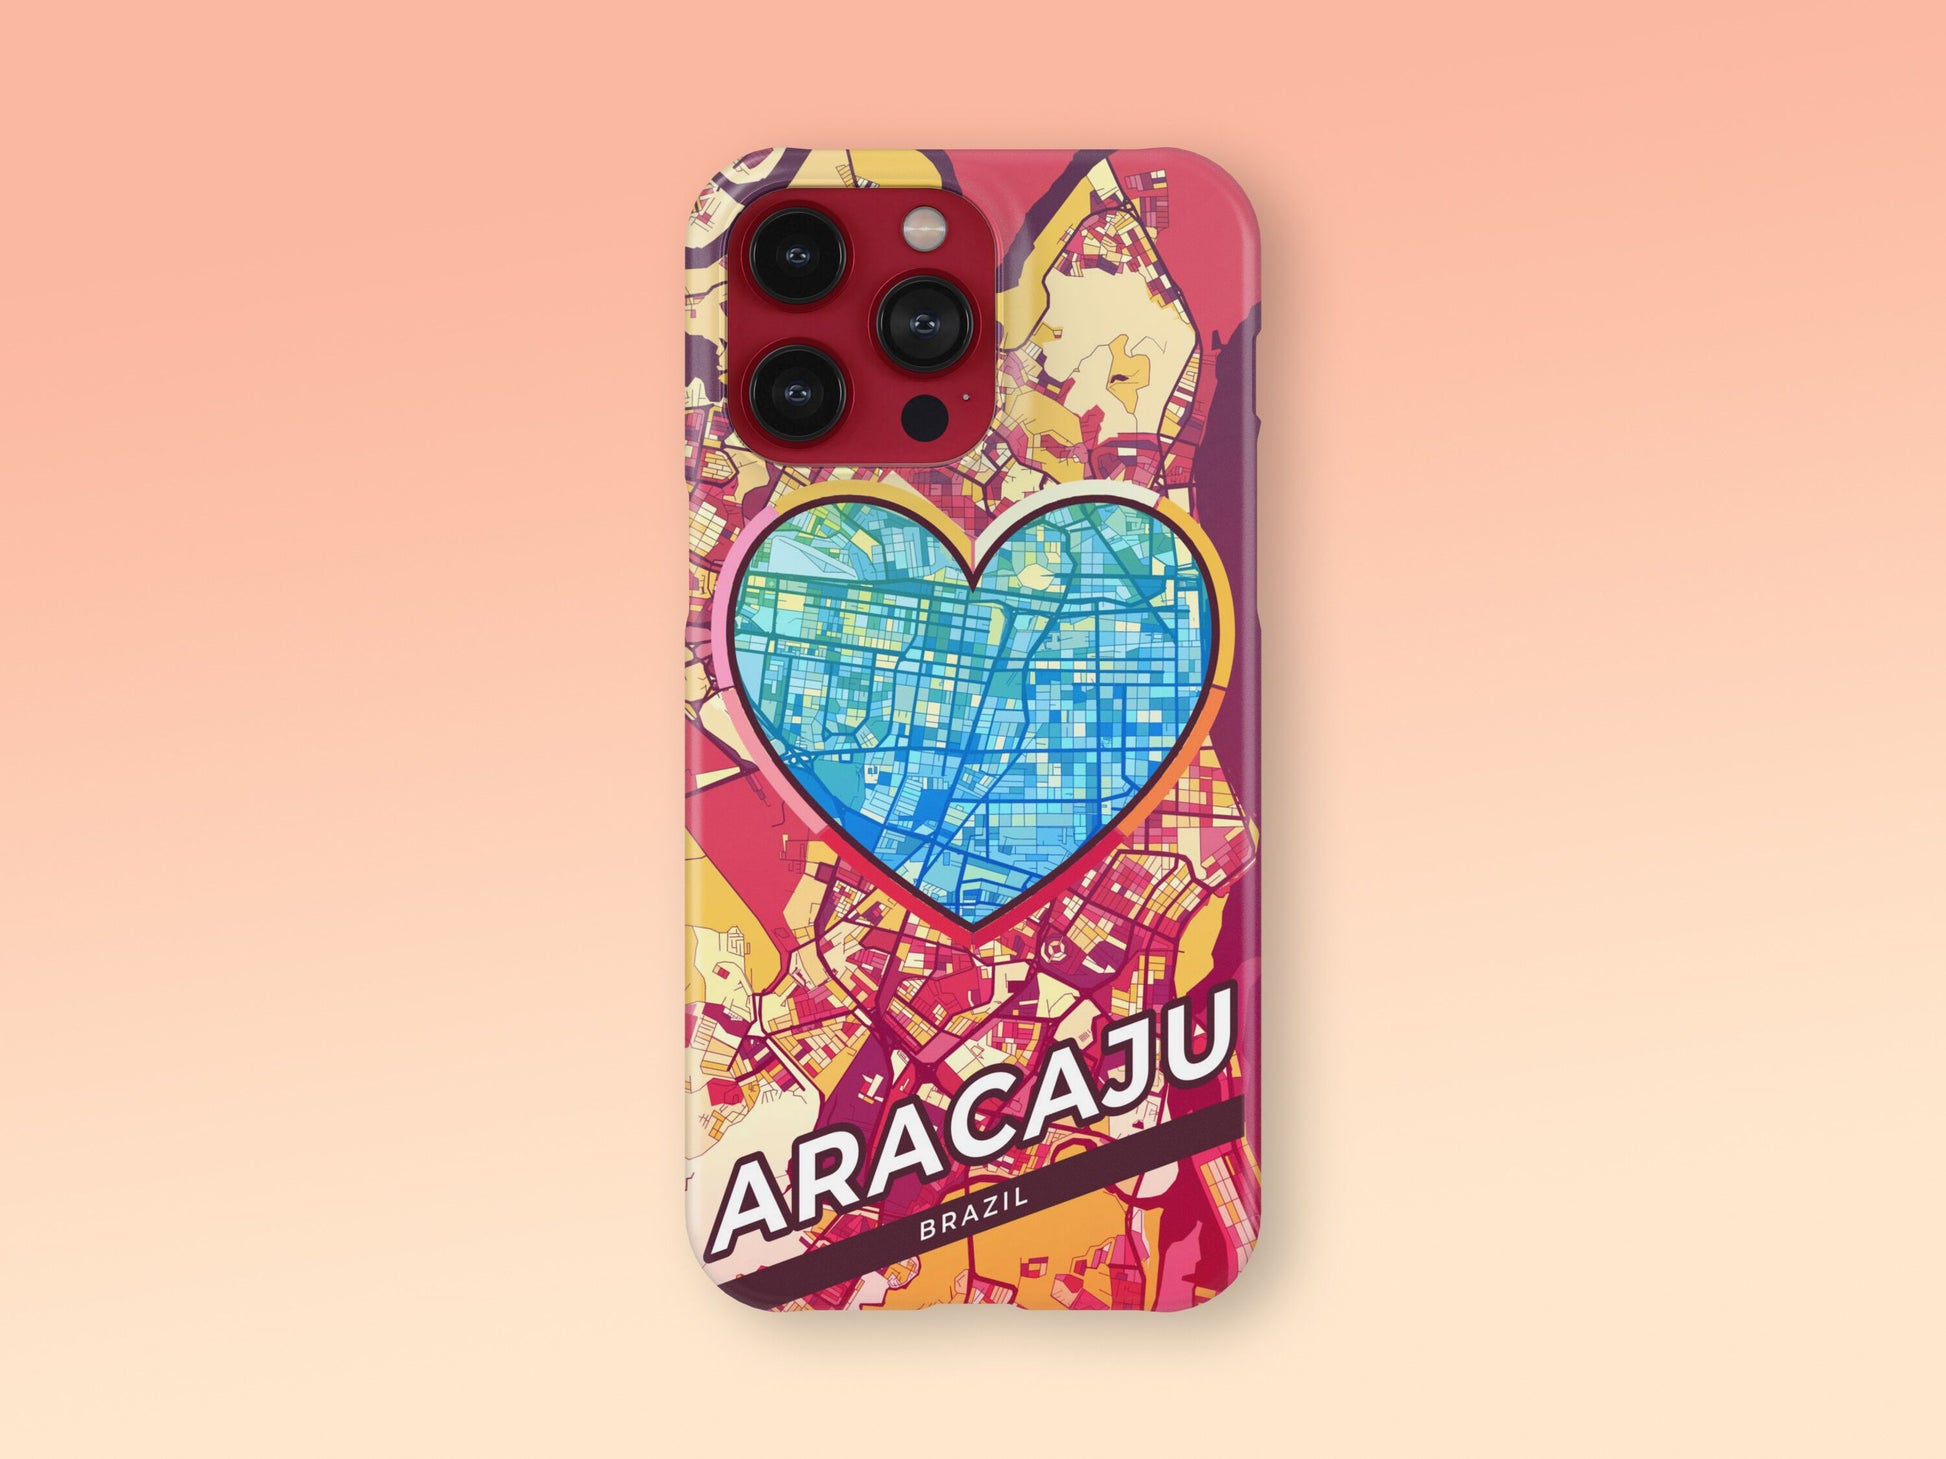 Aracaju Brazil slim phone case with colorful icon. Birthday, wedding or housewarming gift. Couple match cases. 2